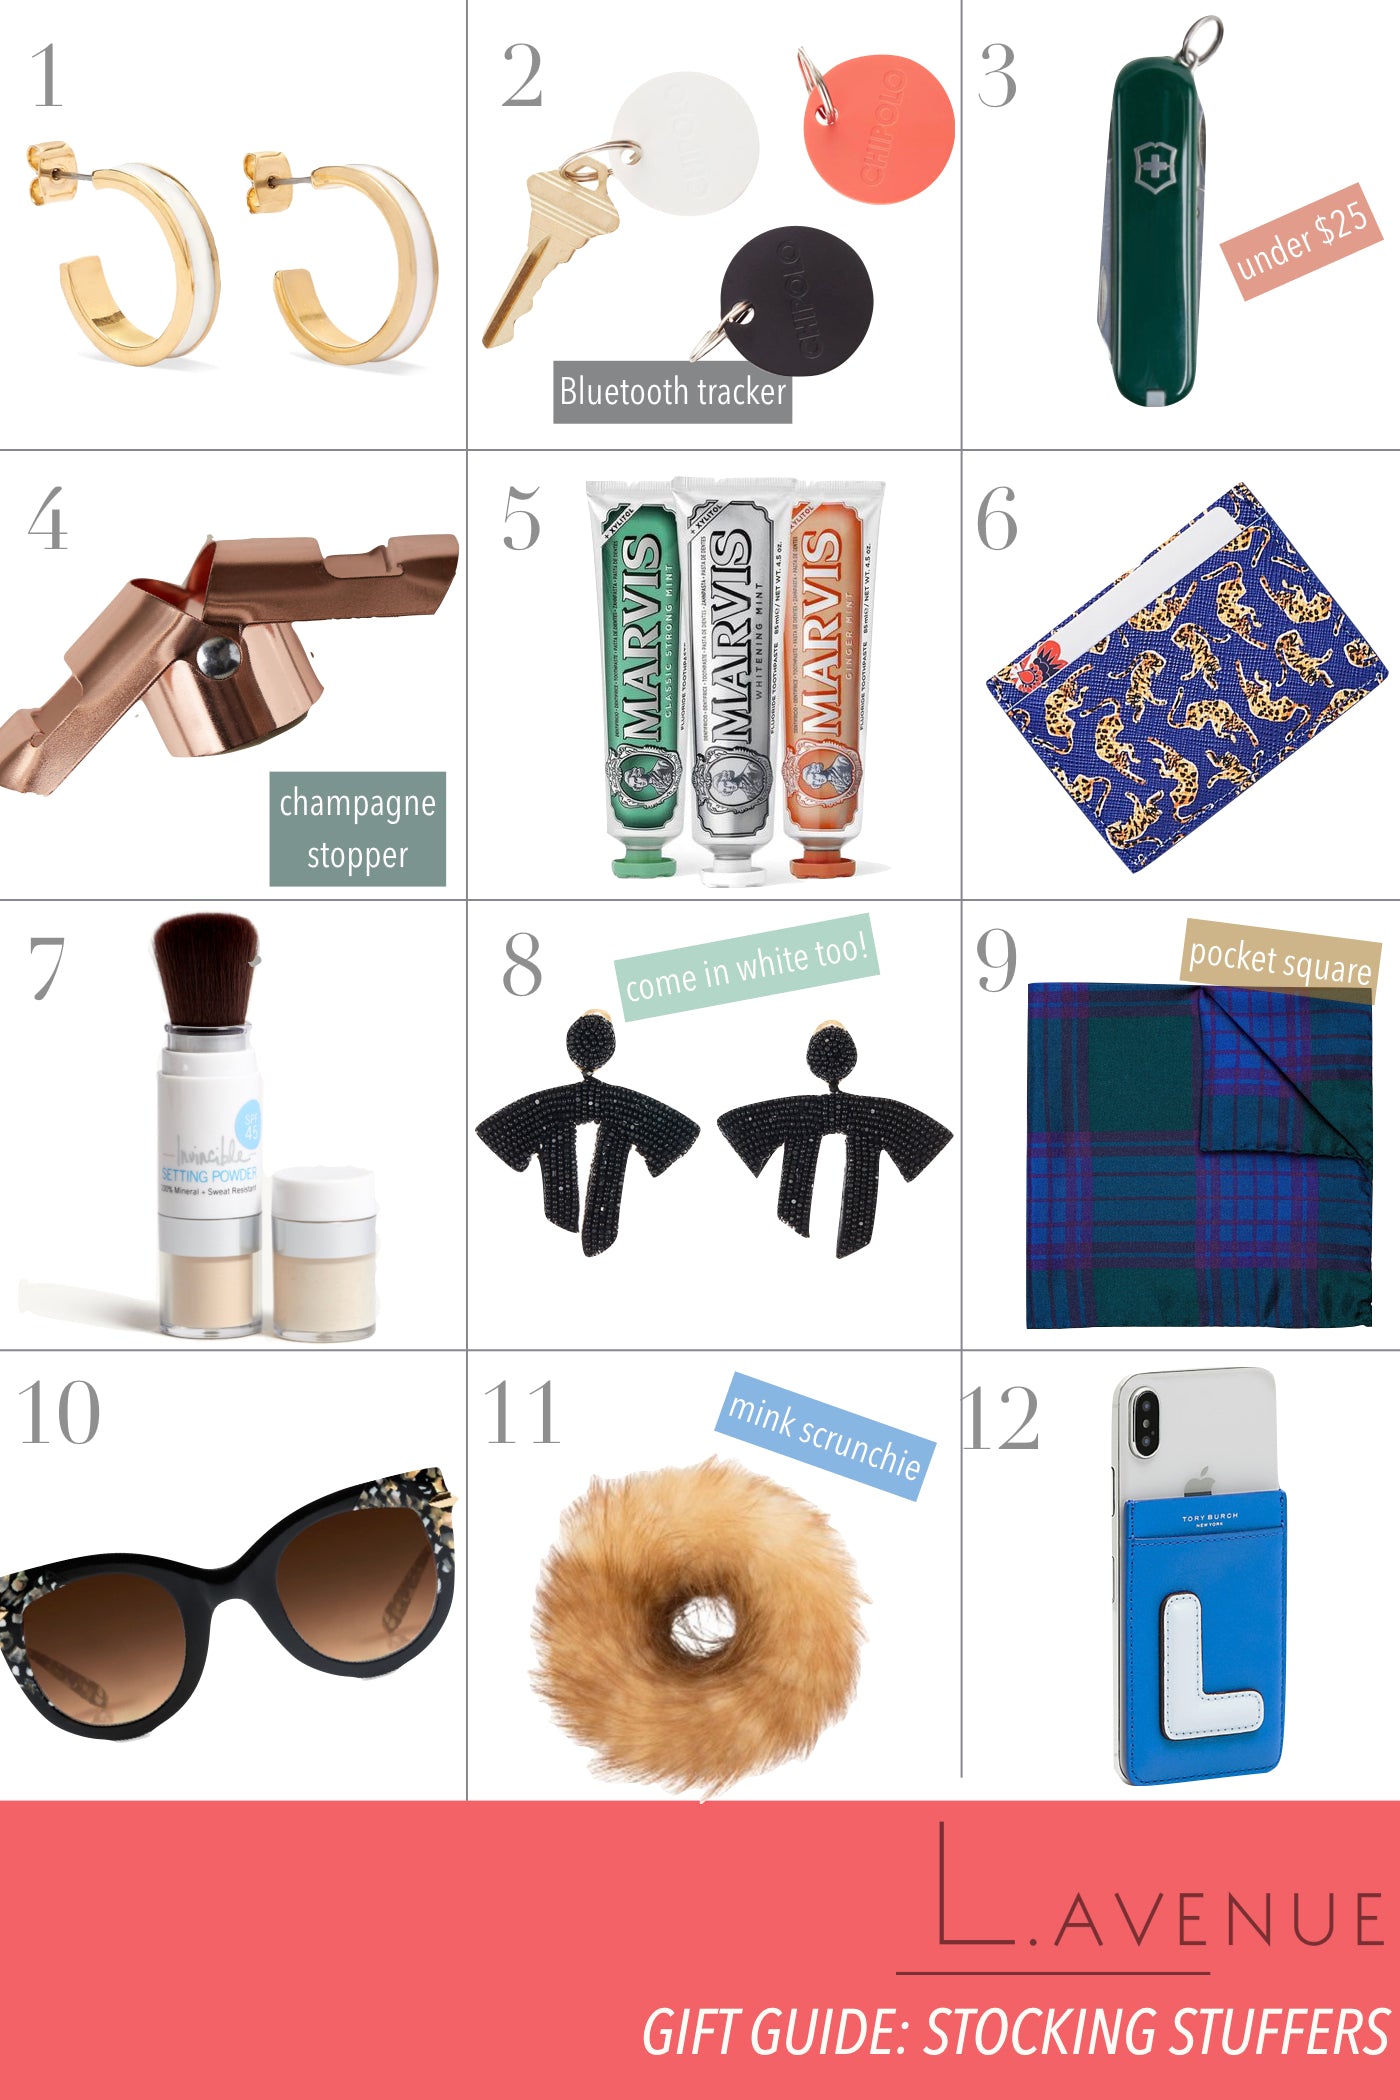 Gift Guide :: Stocking Stuffers for The Whole Family